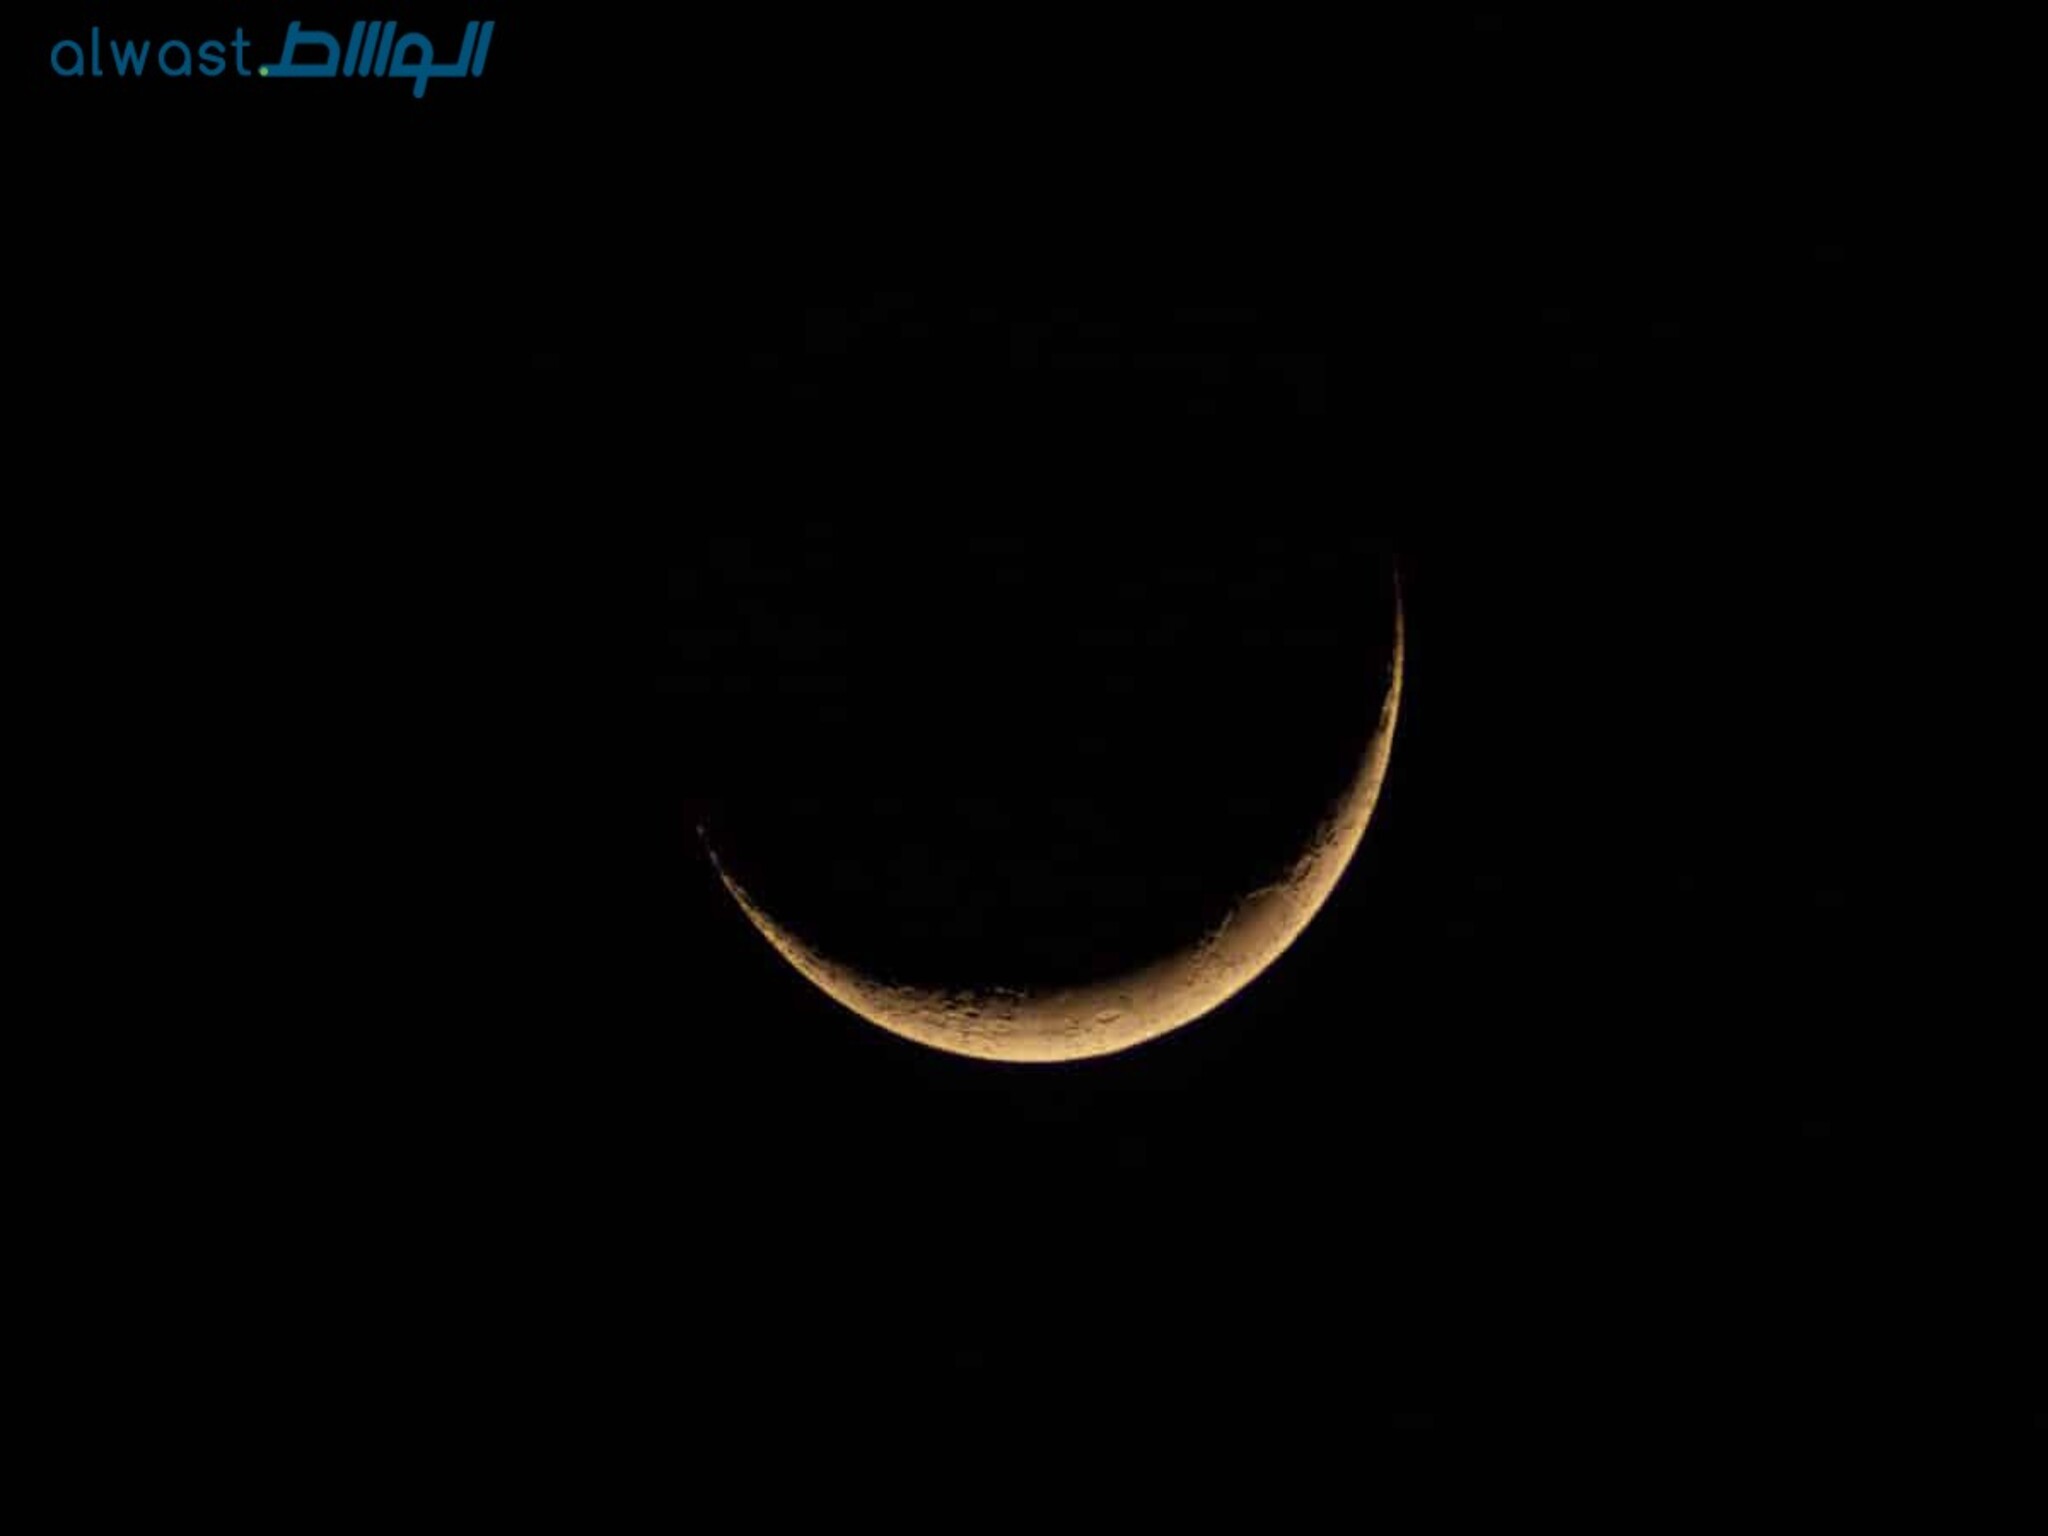 UAE Urges Muslims to search for Shawwal crescent moon on Monday